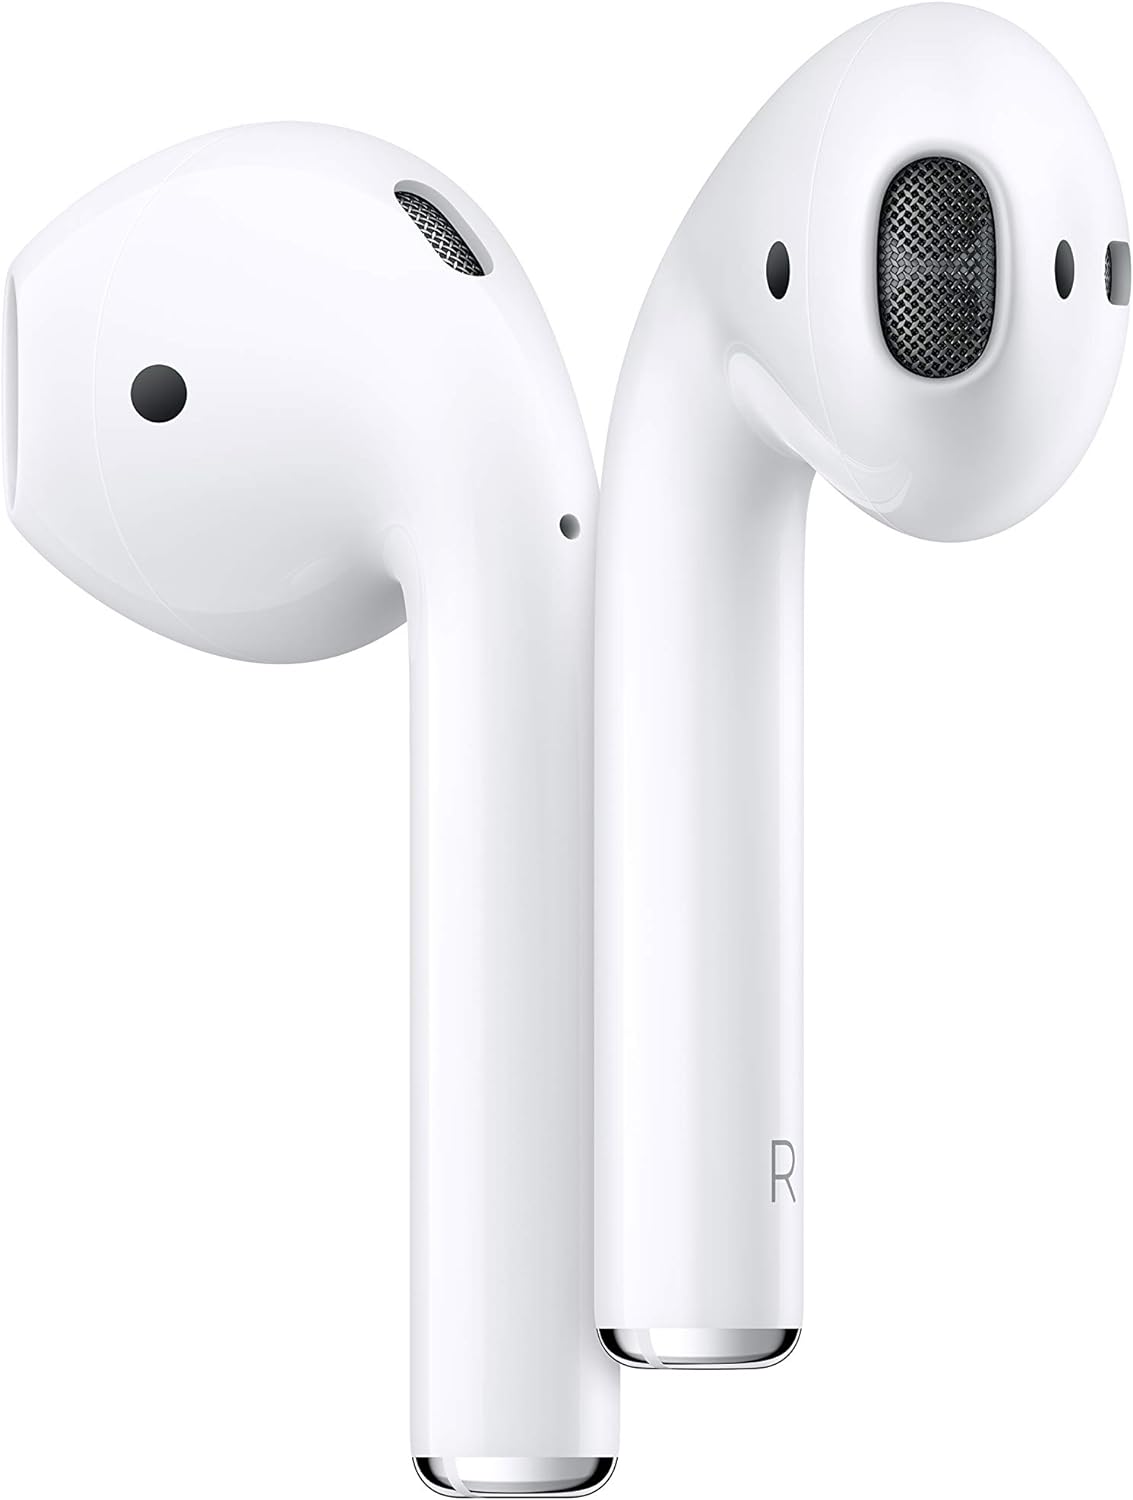 Apple AirPods with Charging Case (2nd Generation) (MV7N2AM/A) - With Cleaning Cloth and USB Power Adapter (Renewed) - Reconditioned